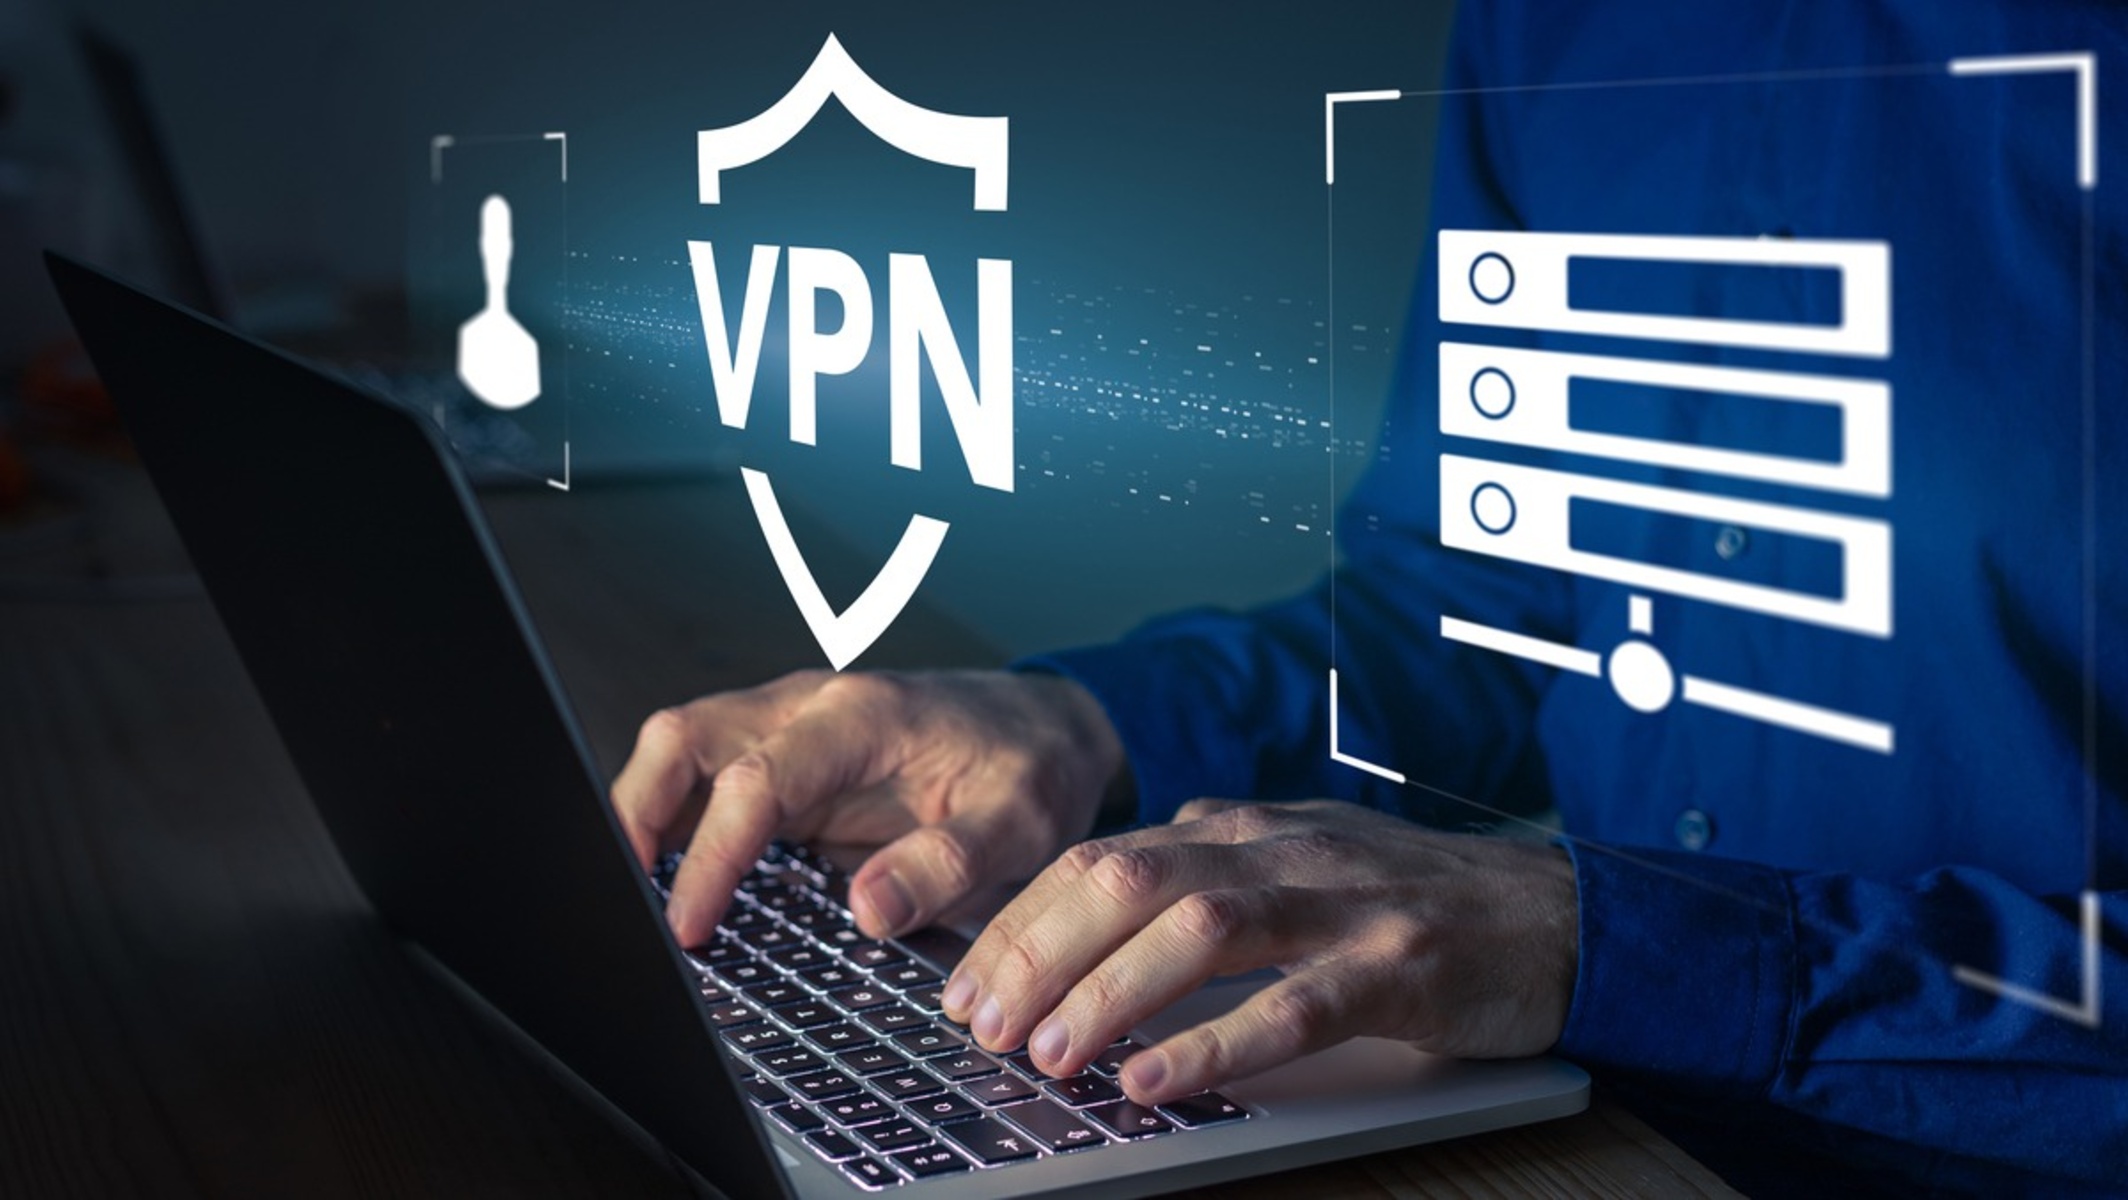 Which Of The Following Statements Is True Regarding A VPN